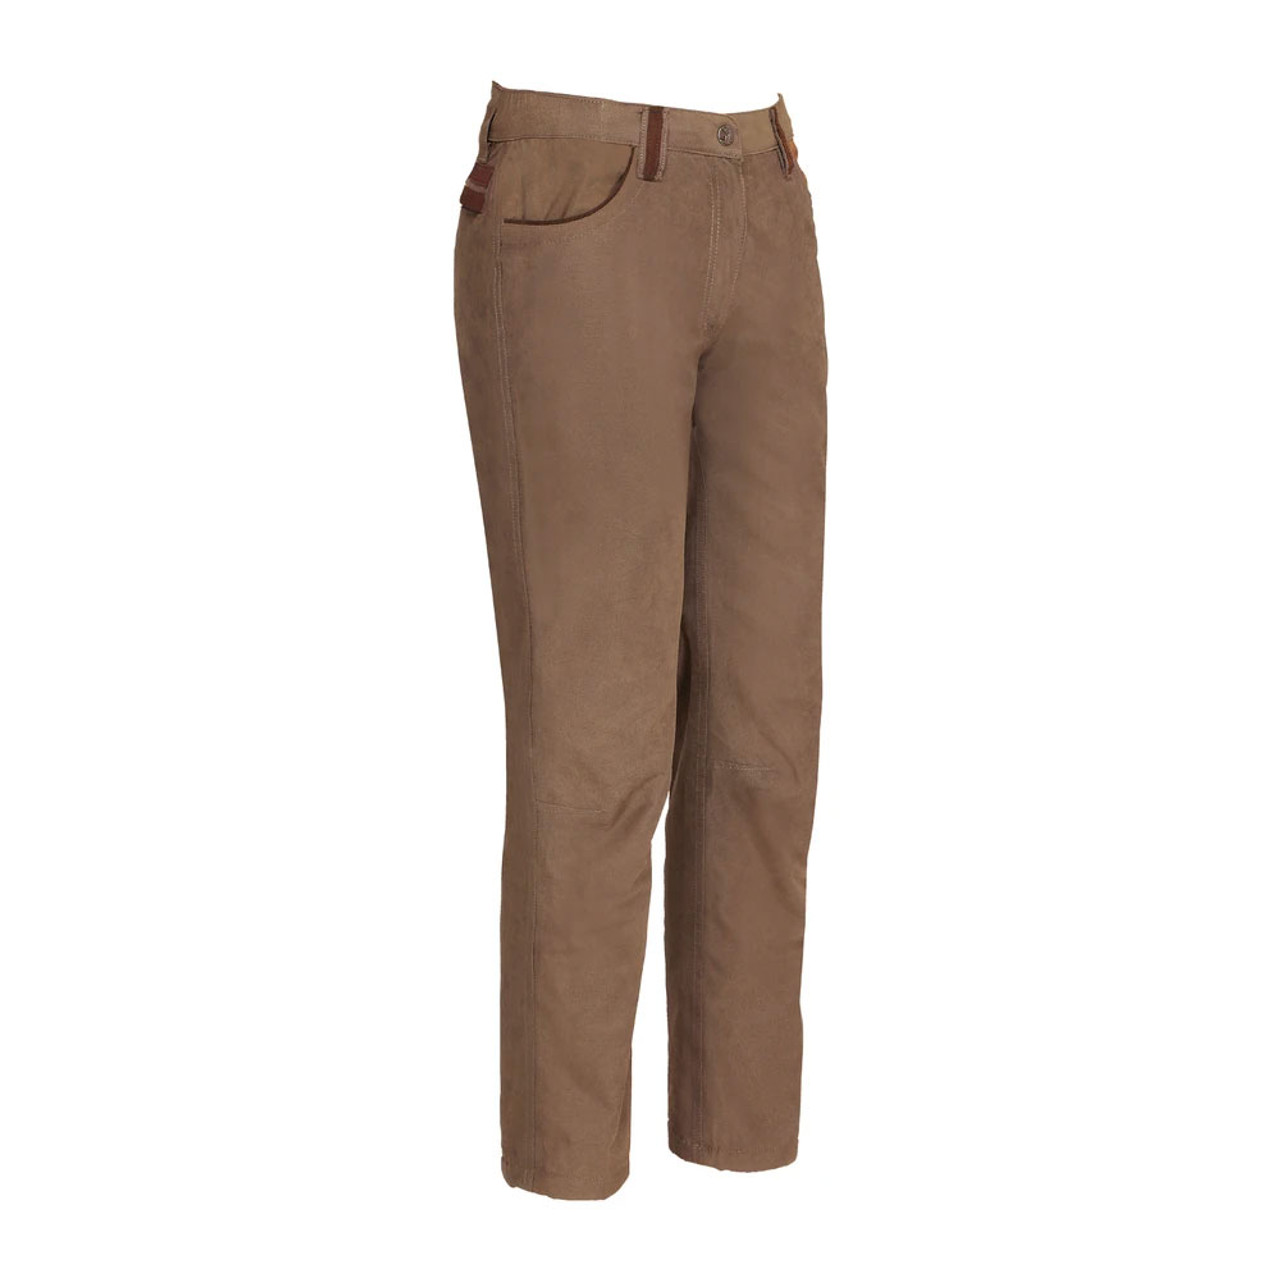 Ladies shooting trousers with lining